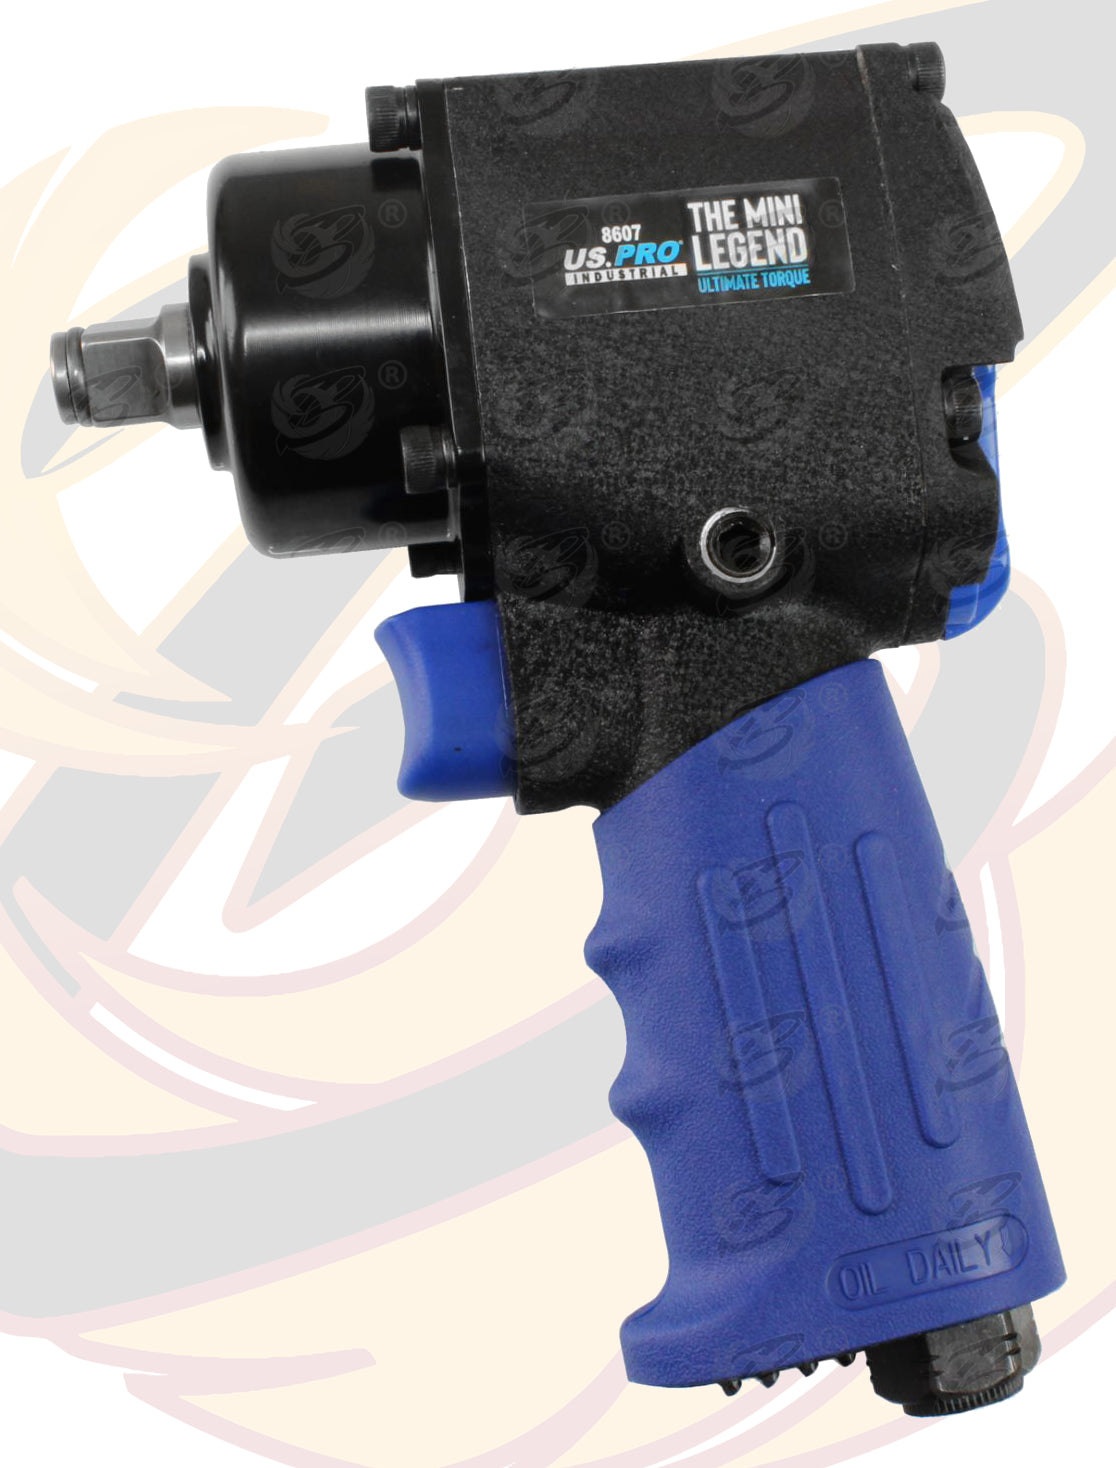 US PRO 1/2" DRIVE COMPACT AIR IMPACT WRENCH 1070Nm ( THE MINI LEGEND )